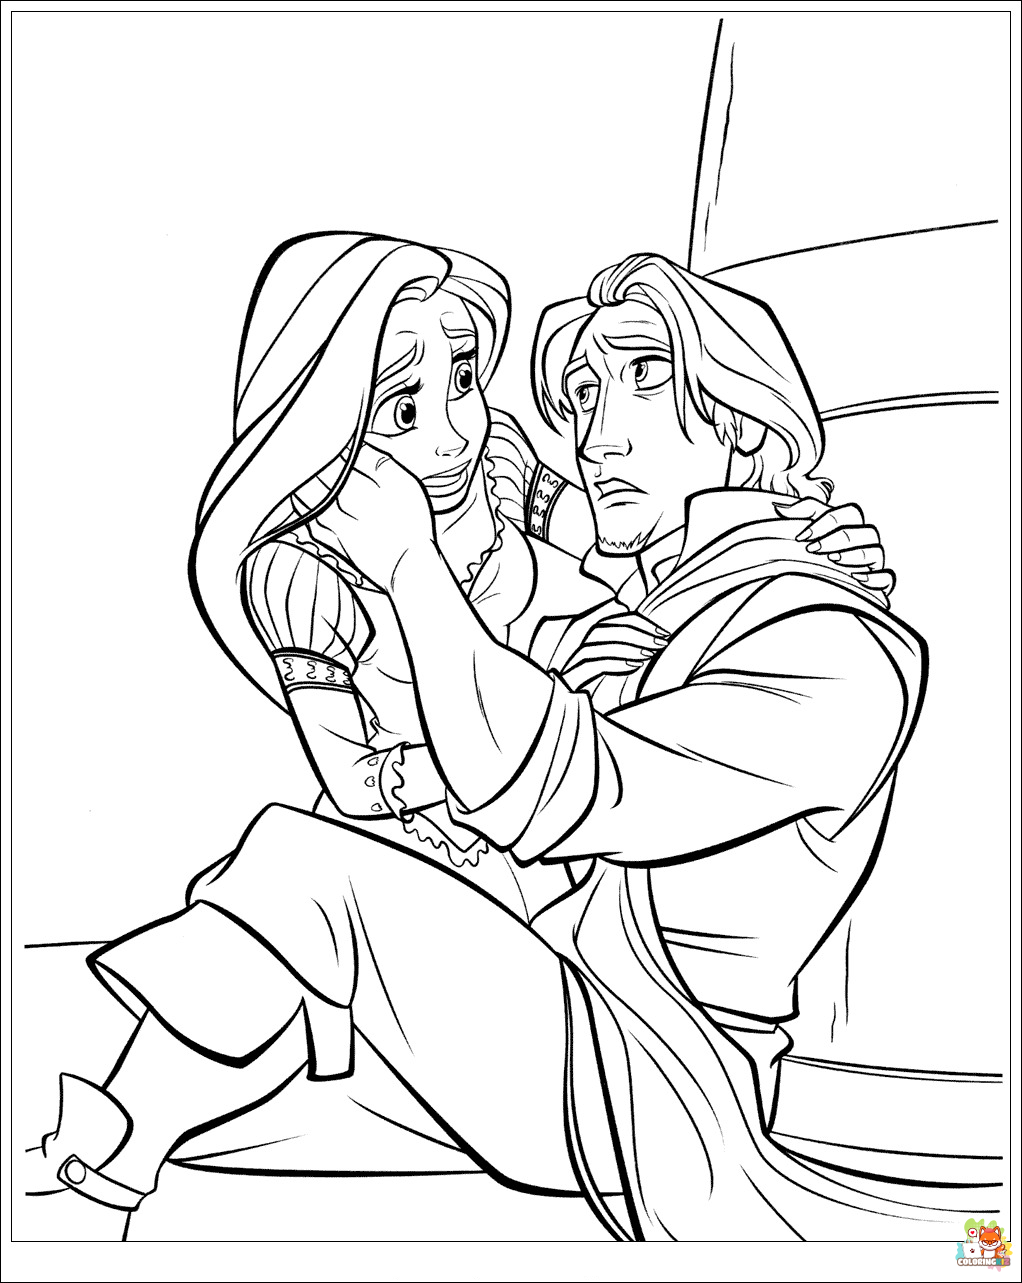 Flynn and Rapunzel Coloring Pages 1 1